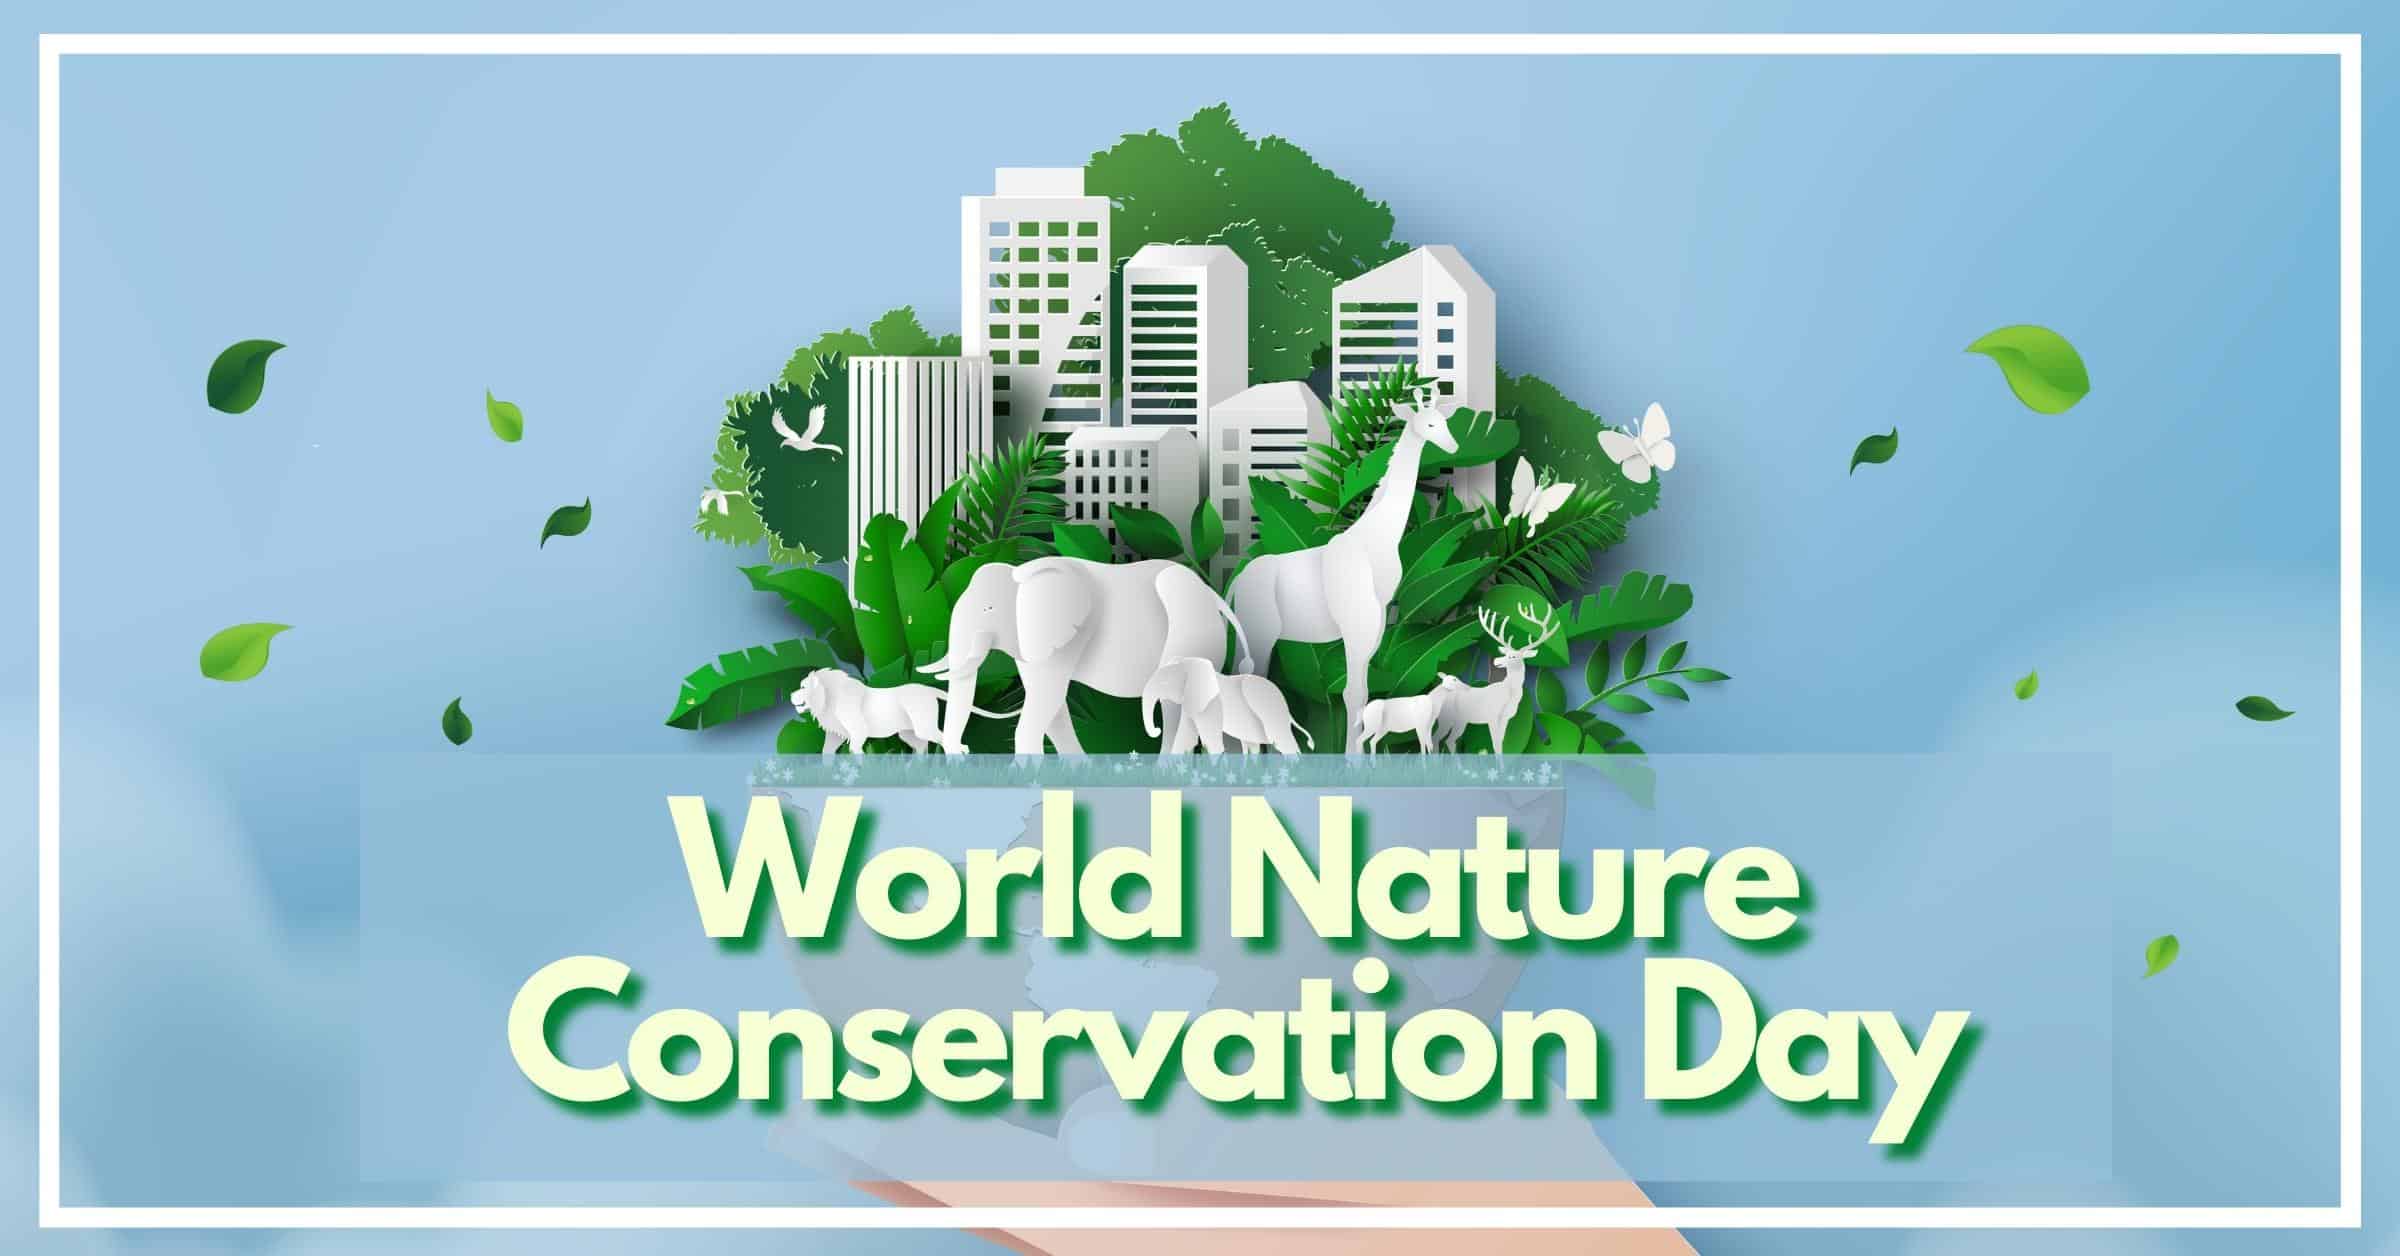 World Nature Conservation Day / International Conservation Day